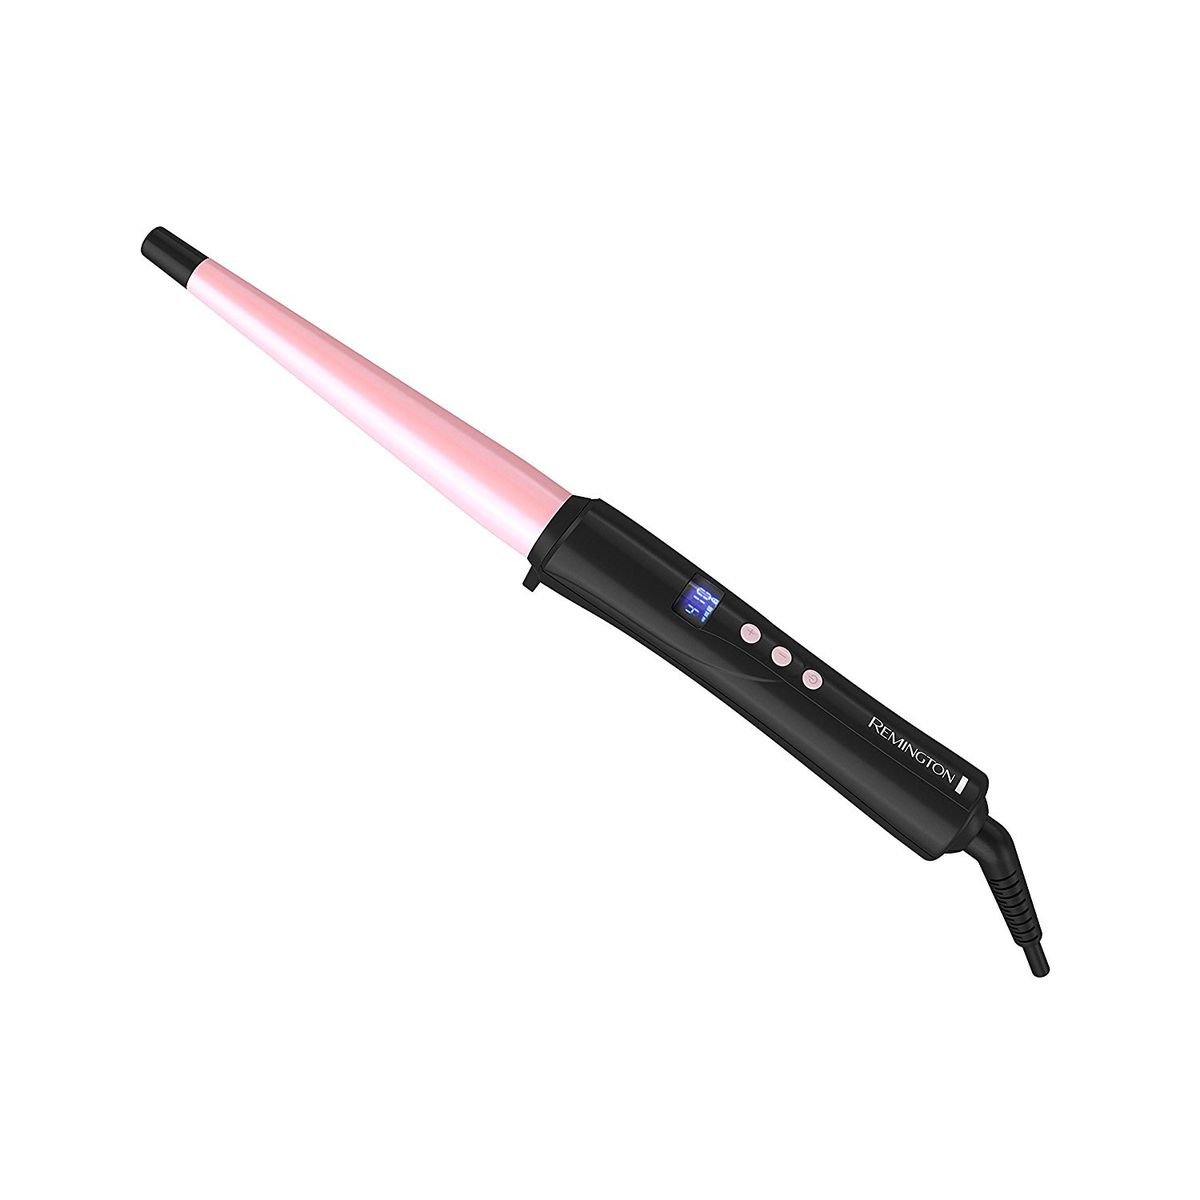 Remington Pro ½-1” Curling Wand with Pearl Ceramic Technology